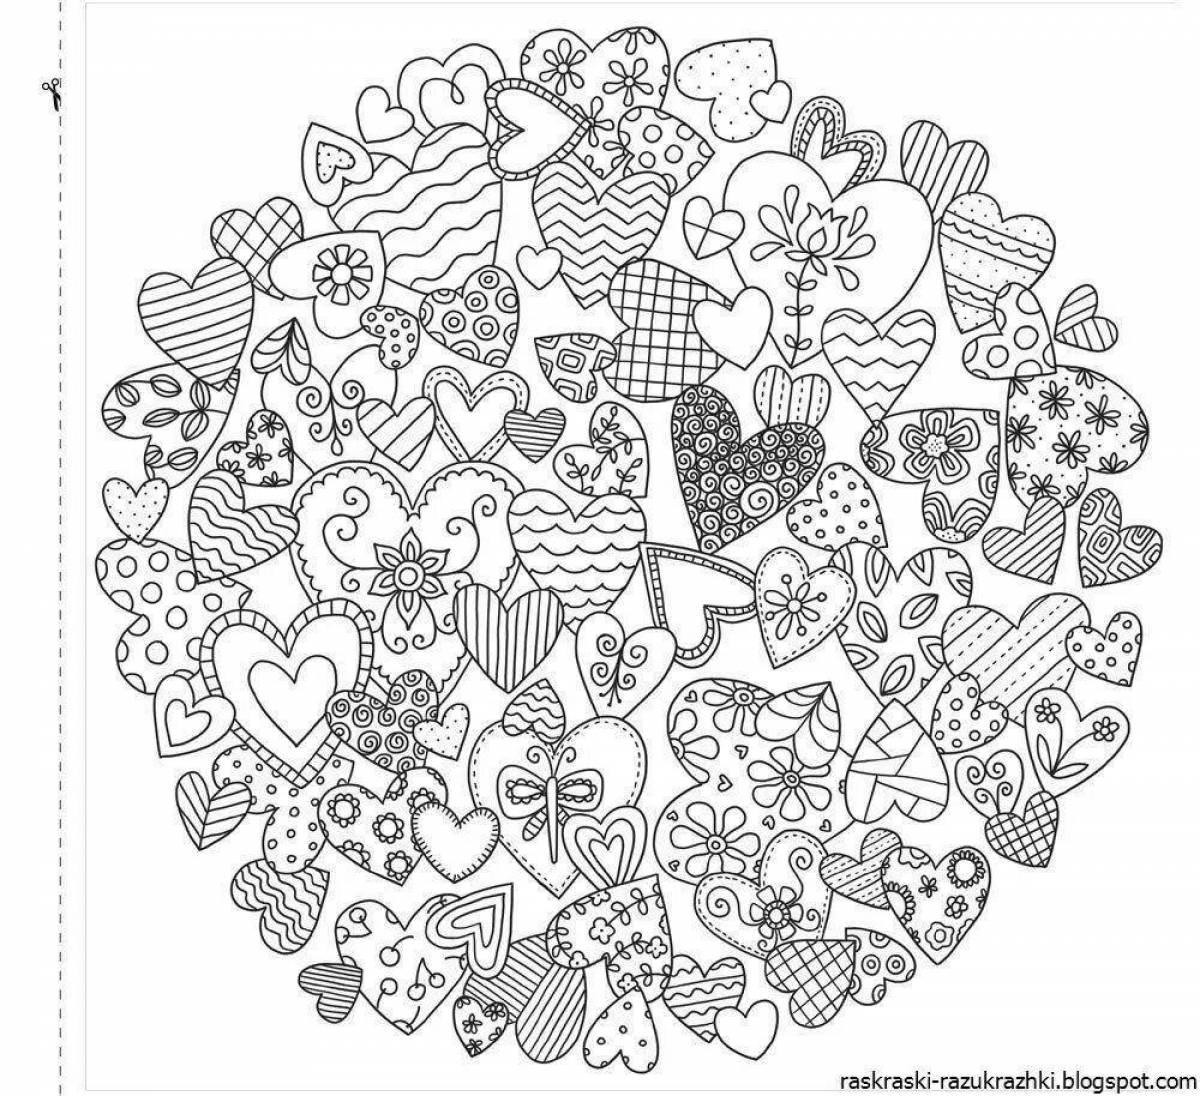 Colorful coloring book with many elements